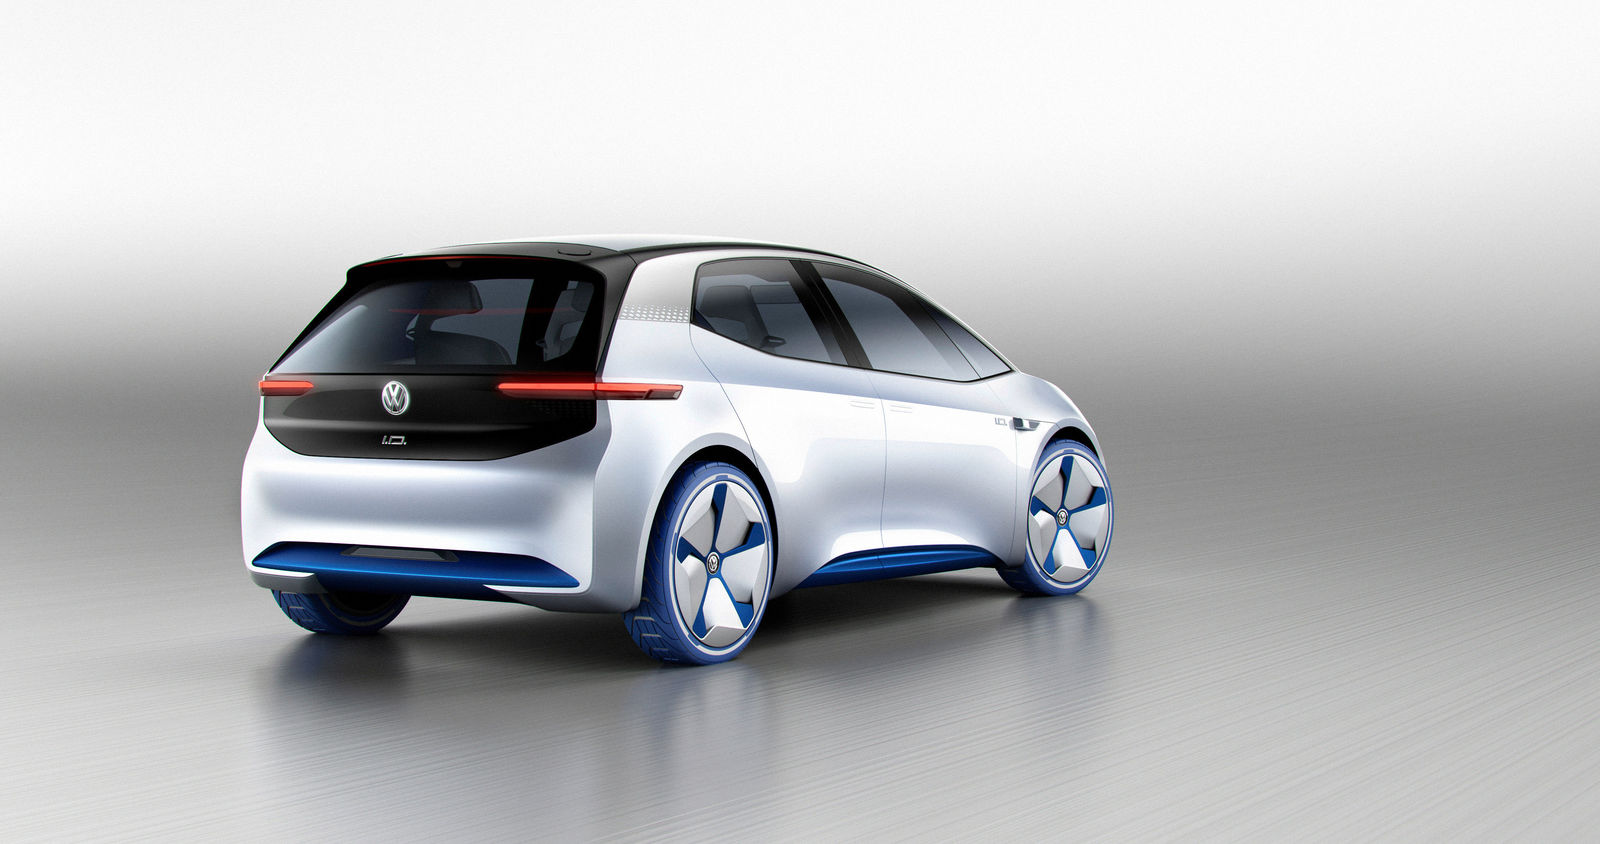 Volkswagen Showcar ID. ID. – the revolution. The first Volkswagen on the all-new electric-vehicle platform. The first Volkswagen prepared for automated driving.